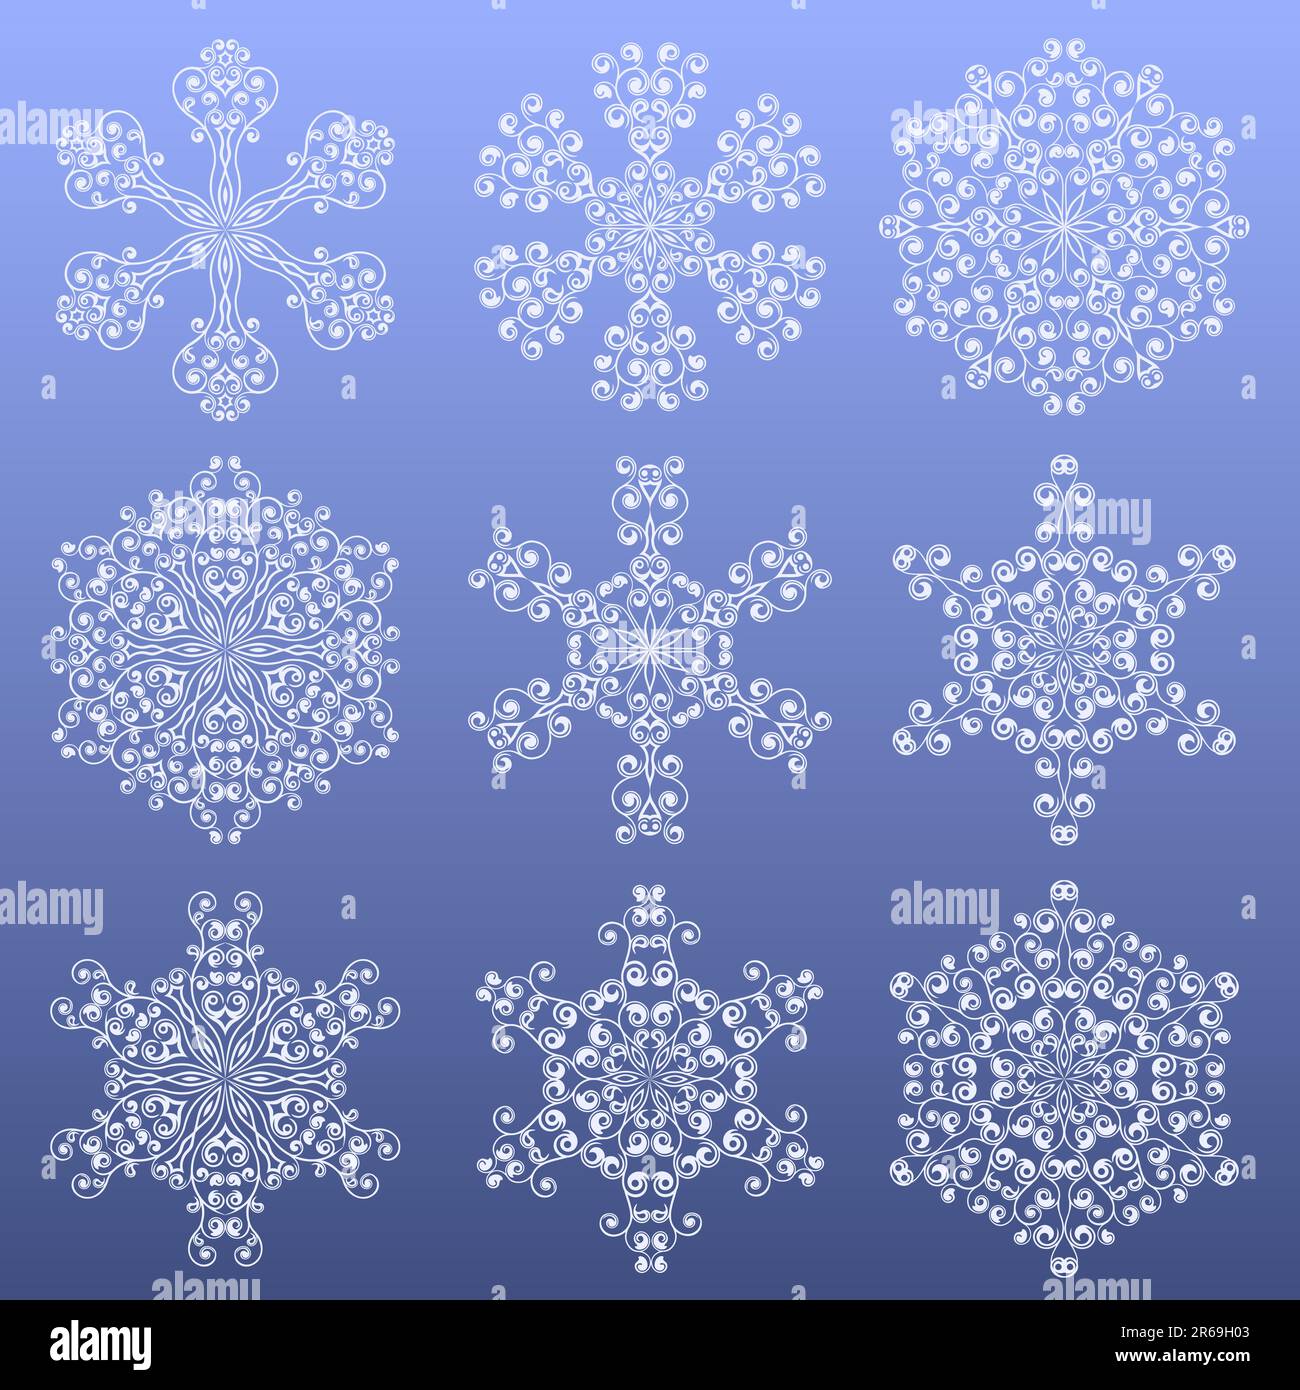 Set of a snowflakes. Vector illustration. Stock Vector